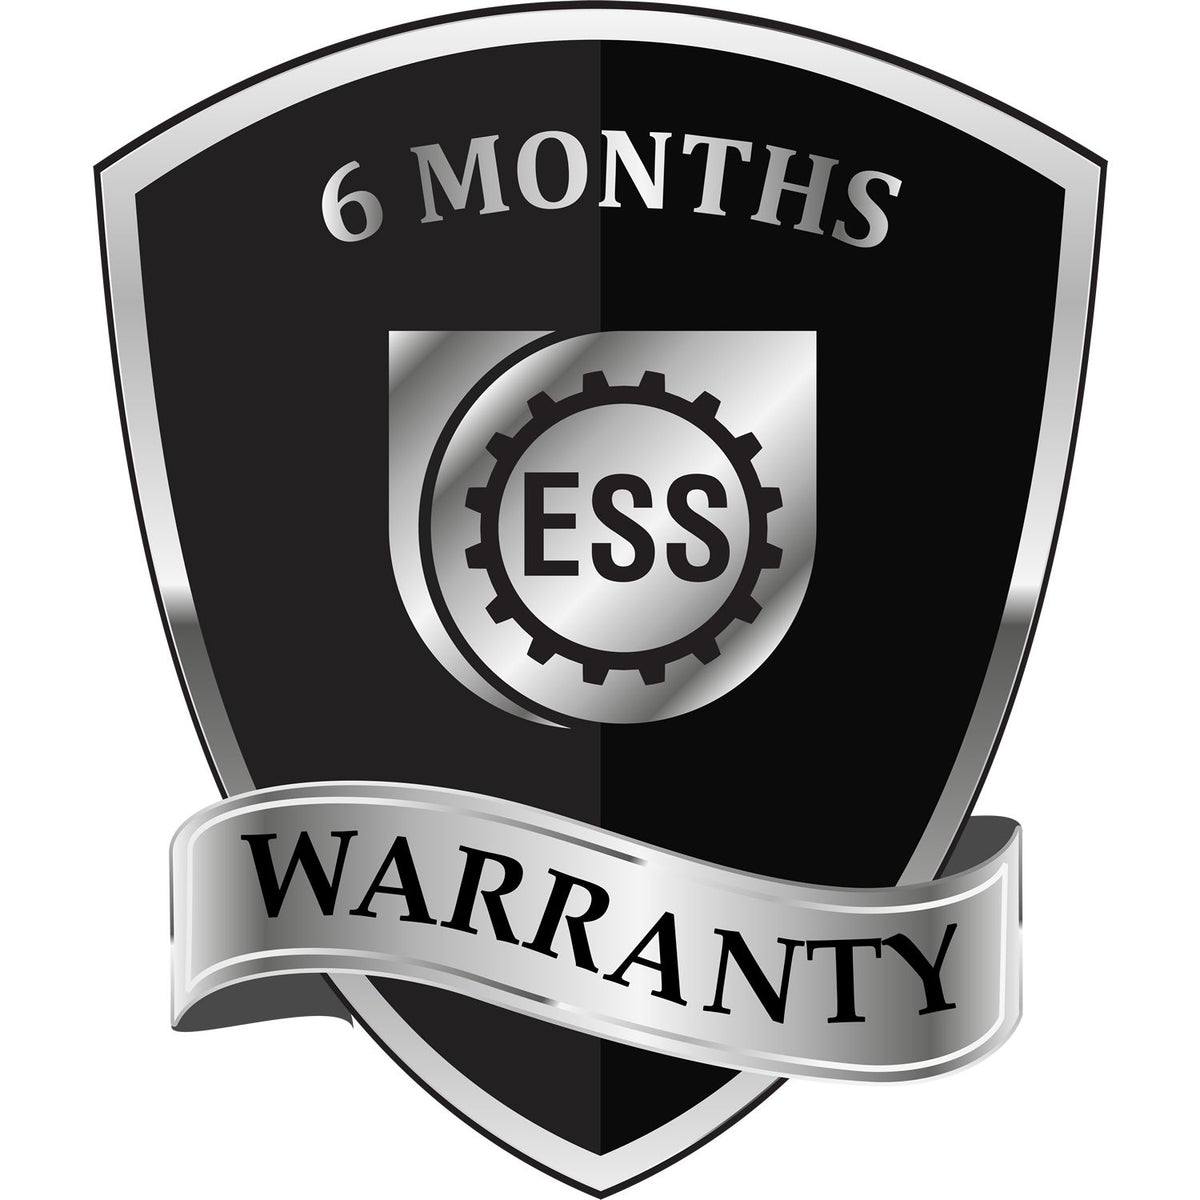 A badge or emblem showing a warranty icon for the Premium MaxLight Pre-Inked Massachusetts Engineering Stamp